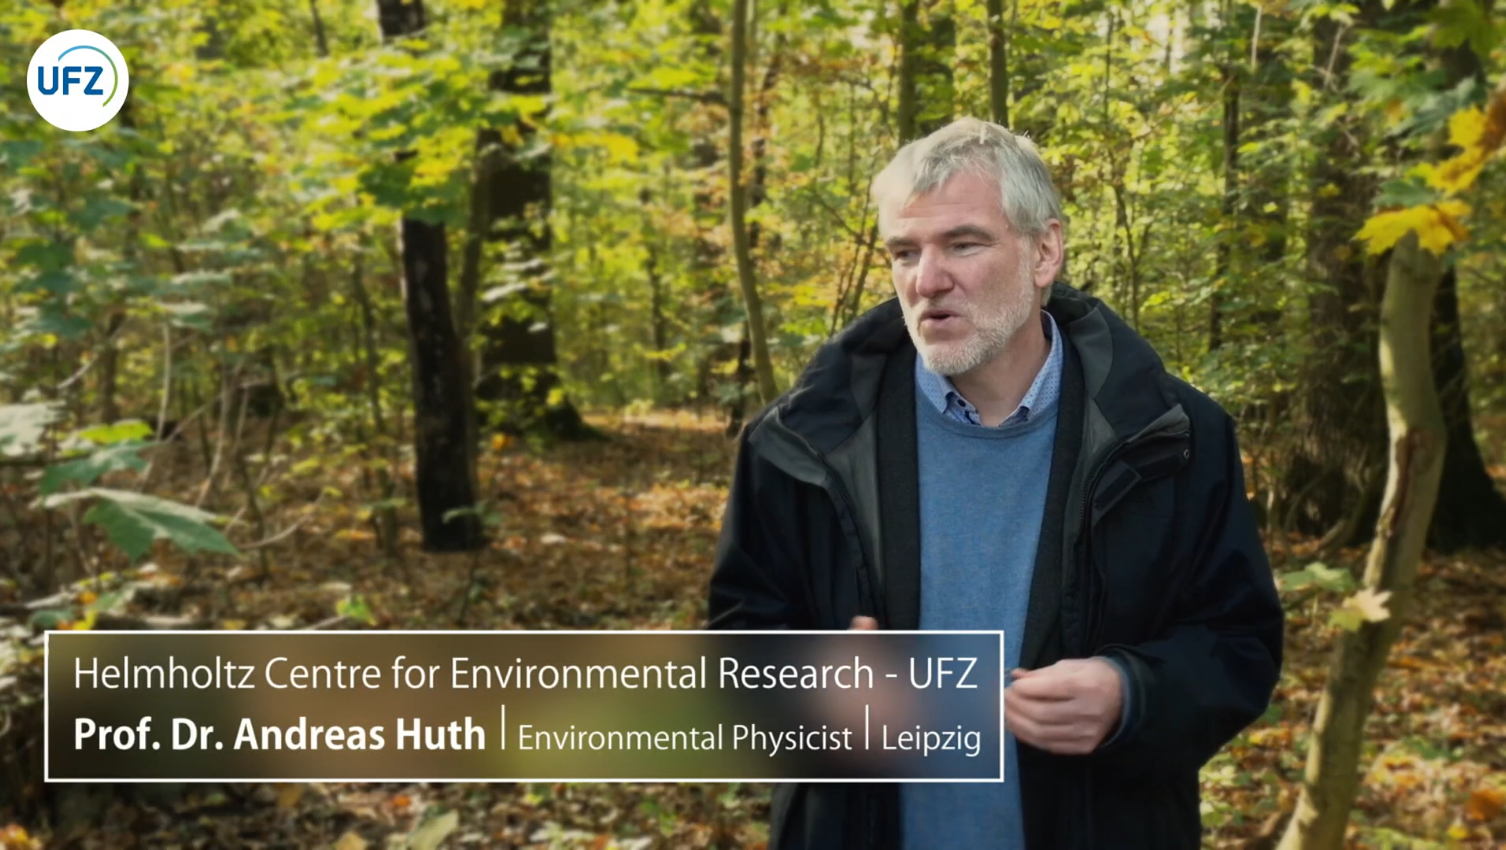 Prof. Dr. Andreas Huth. Source: UFZ / youtube